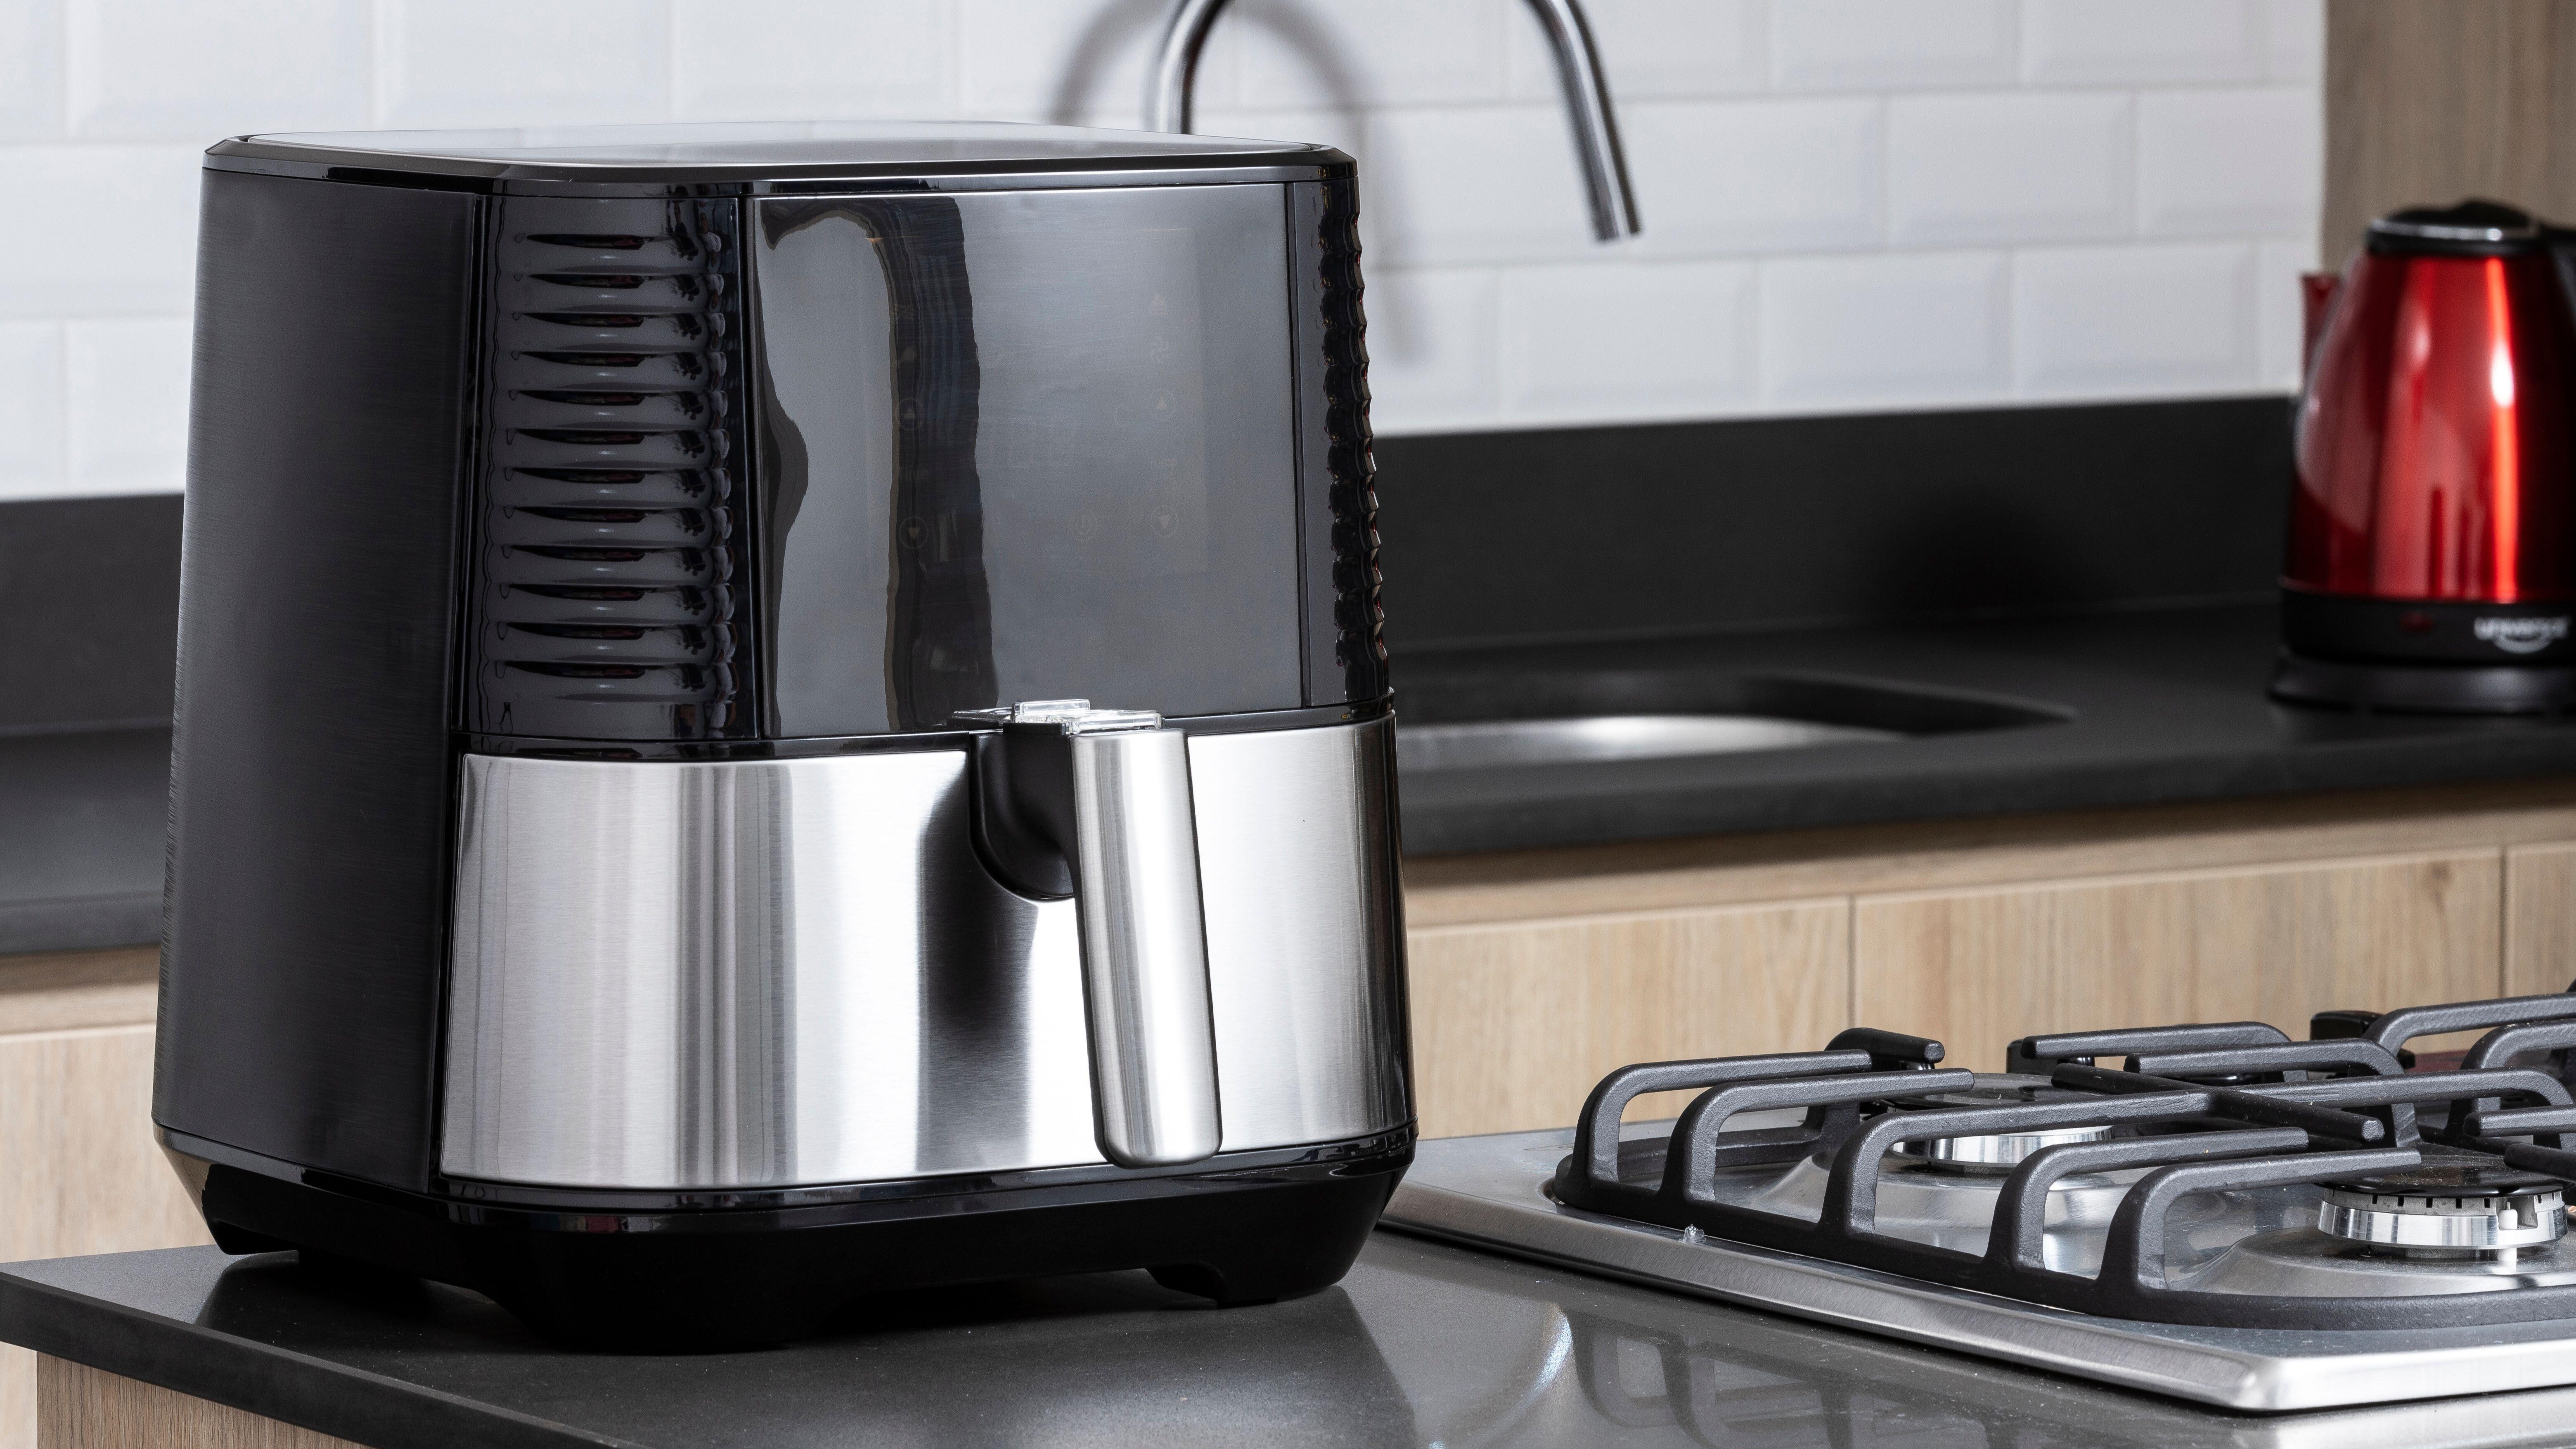 Don't risk damaging your kitchen - here are the 6 worst places to put an air fryer